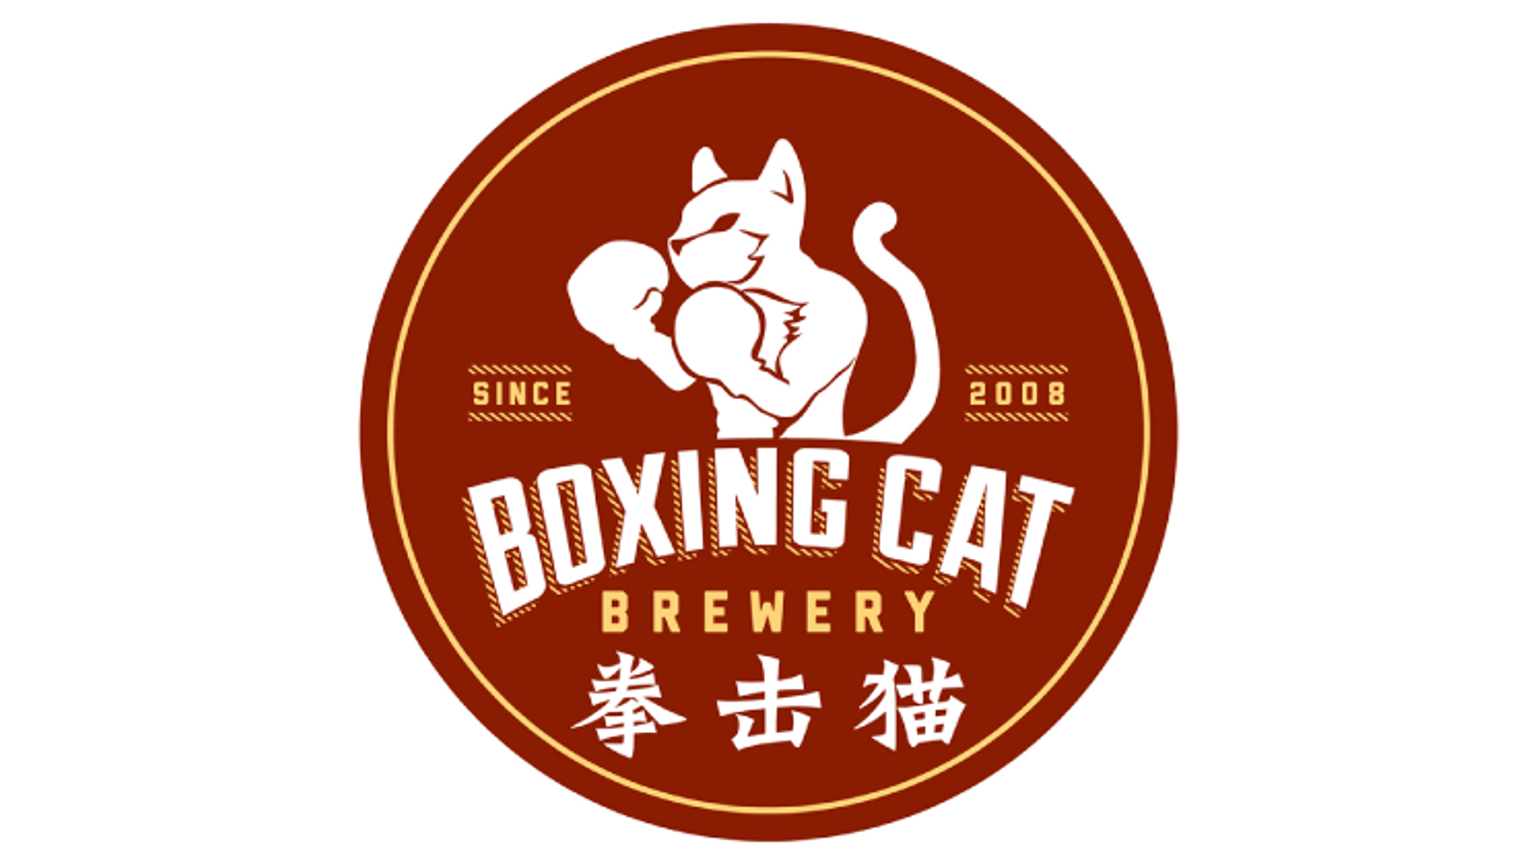 thumbnail for blog article named: Beery Christmas Day 4: Boxing Cat Ringside Red Vienna Lager